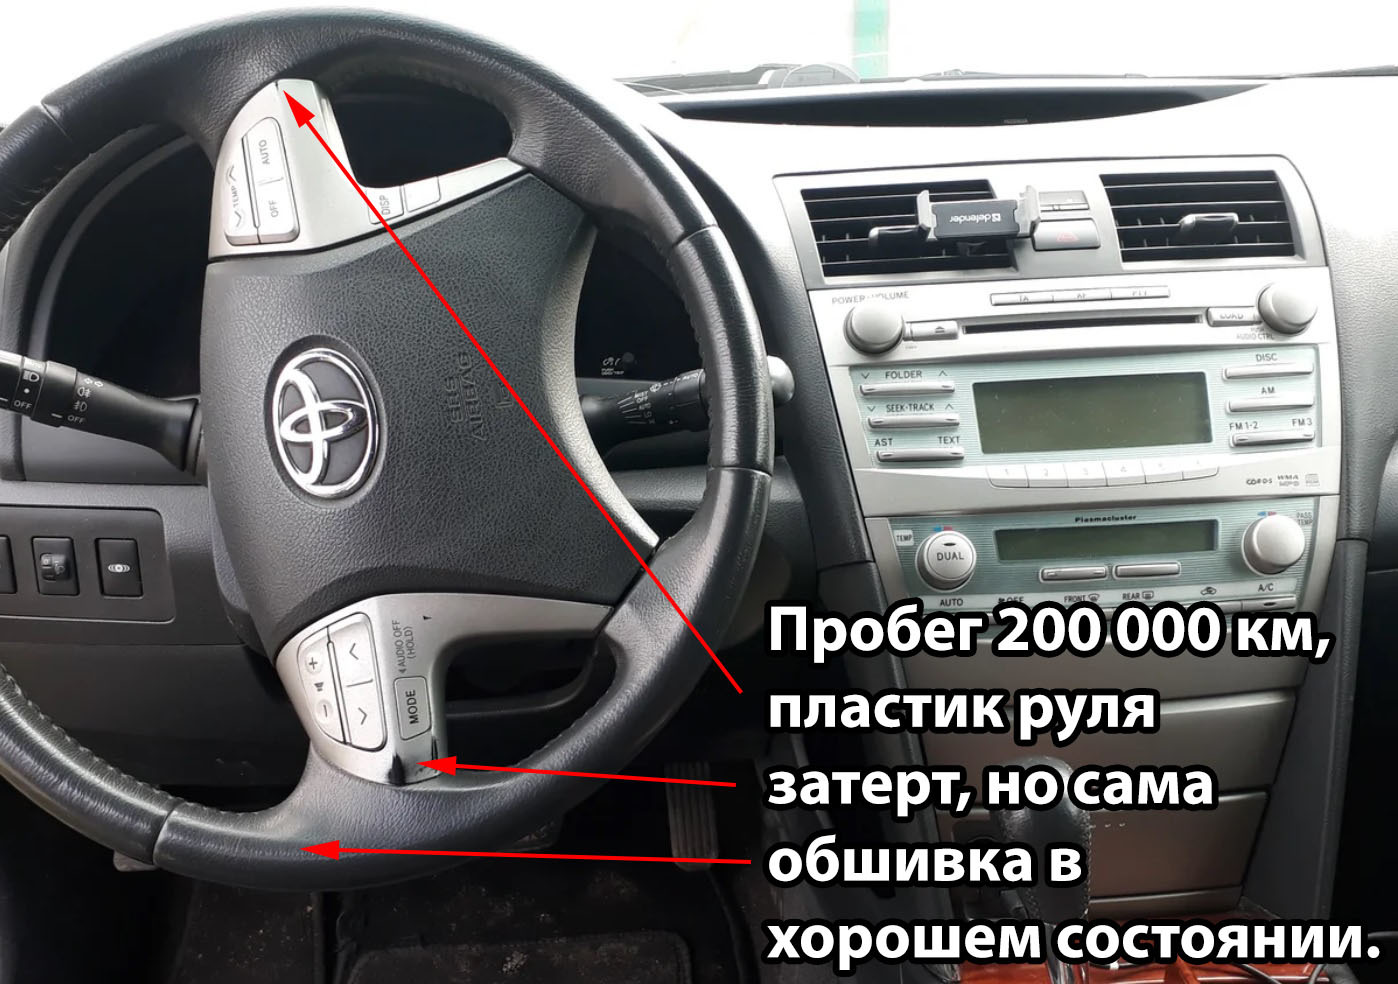 How to check the mileage of a car before buying. - My, Проверка, , Mihalichpodbor, Mileage, Auto, Video, Longpost